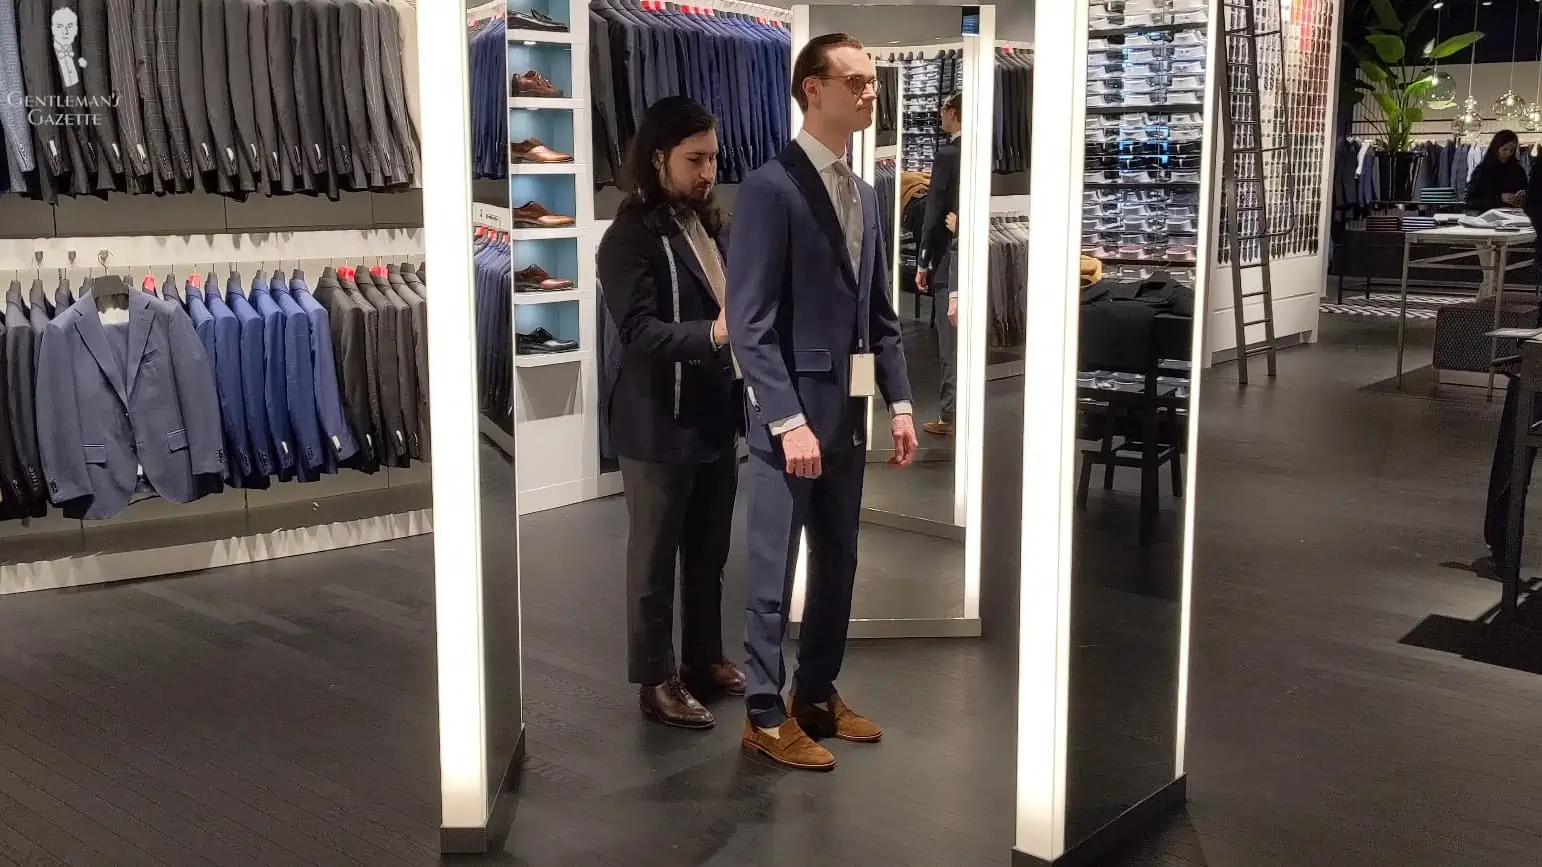 Preston fitting his made-to-measure SuitSupply suit in-store.